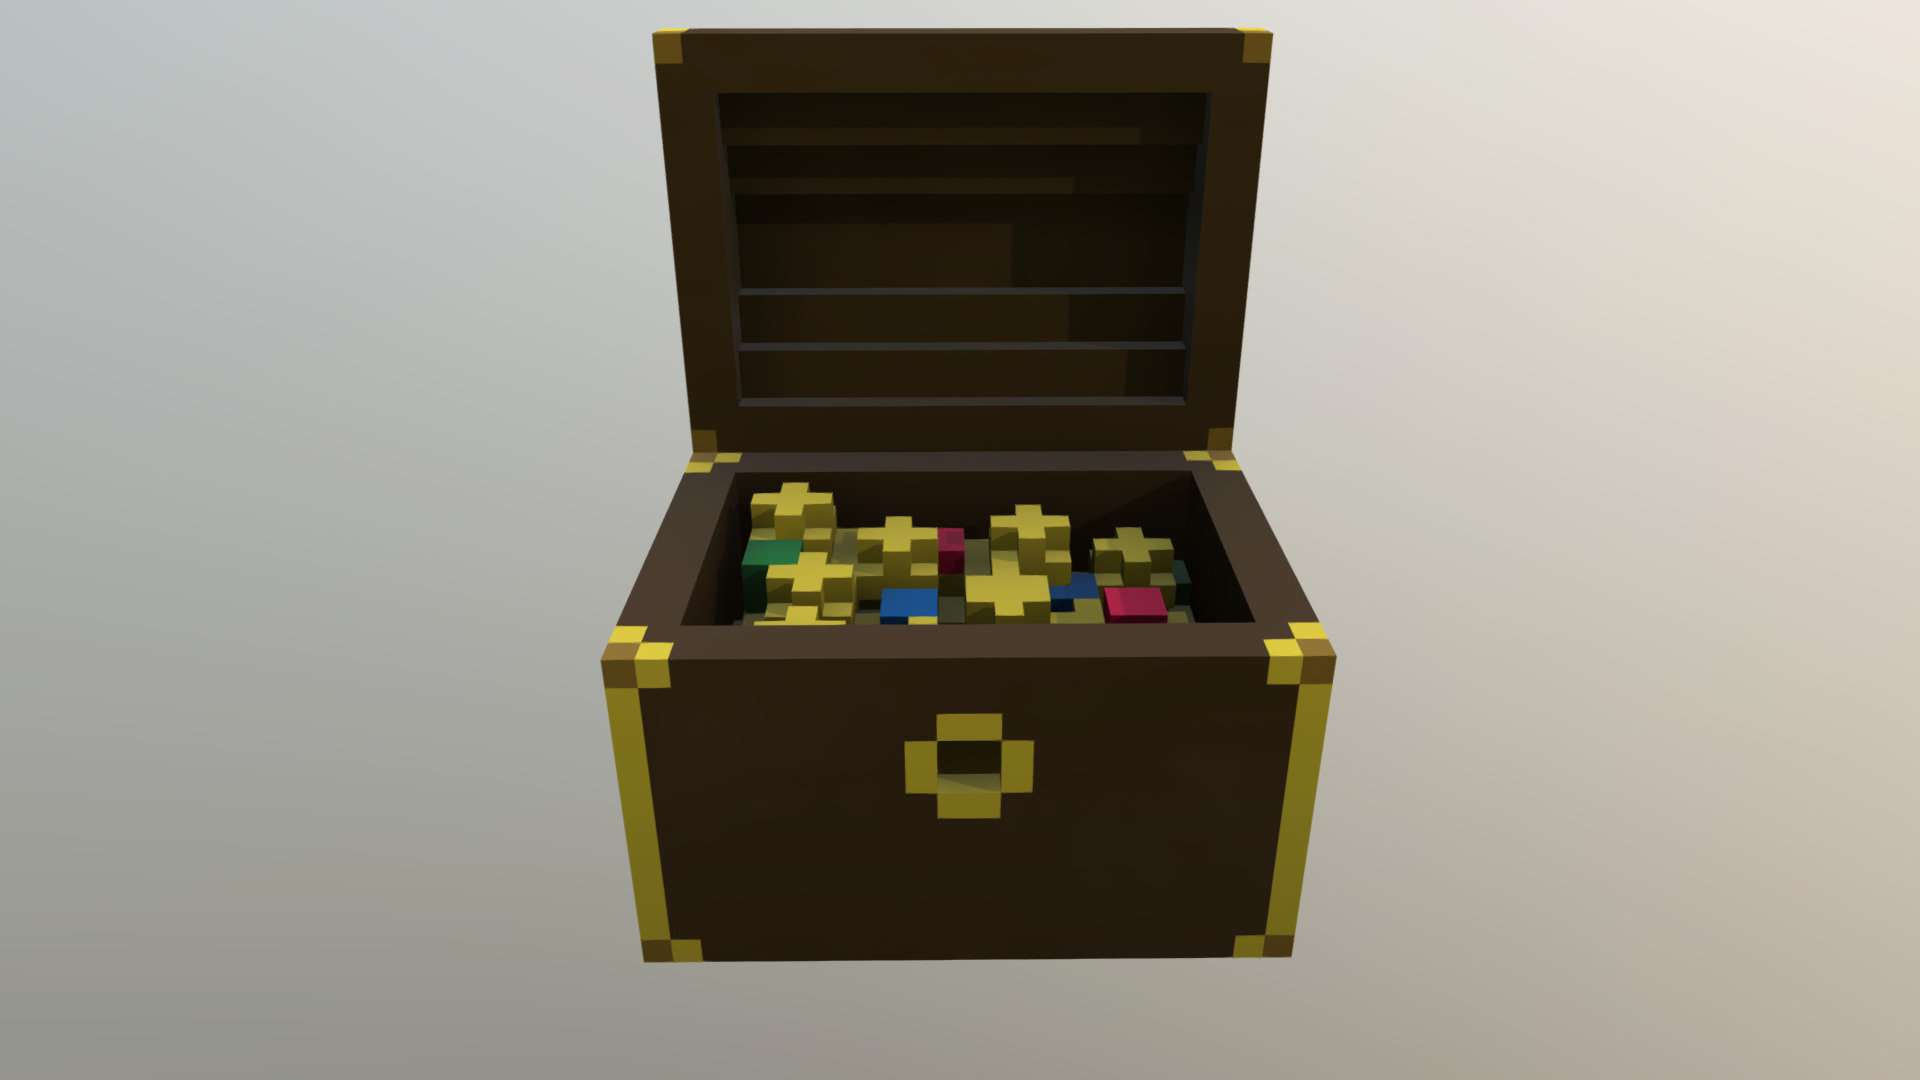 Just a little treasure chest I knocked together to flesh out a maze tutorial 3d model